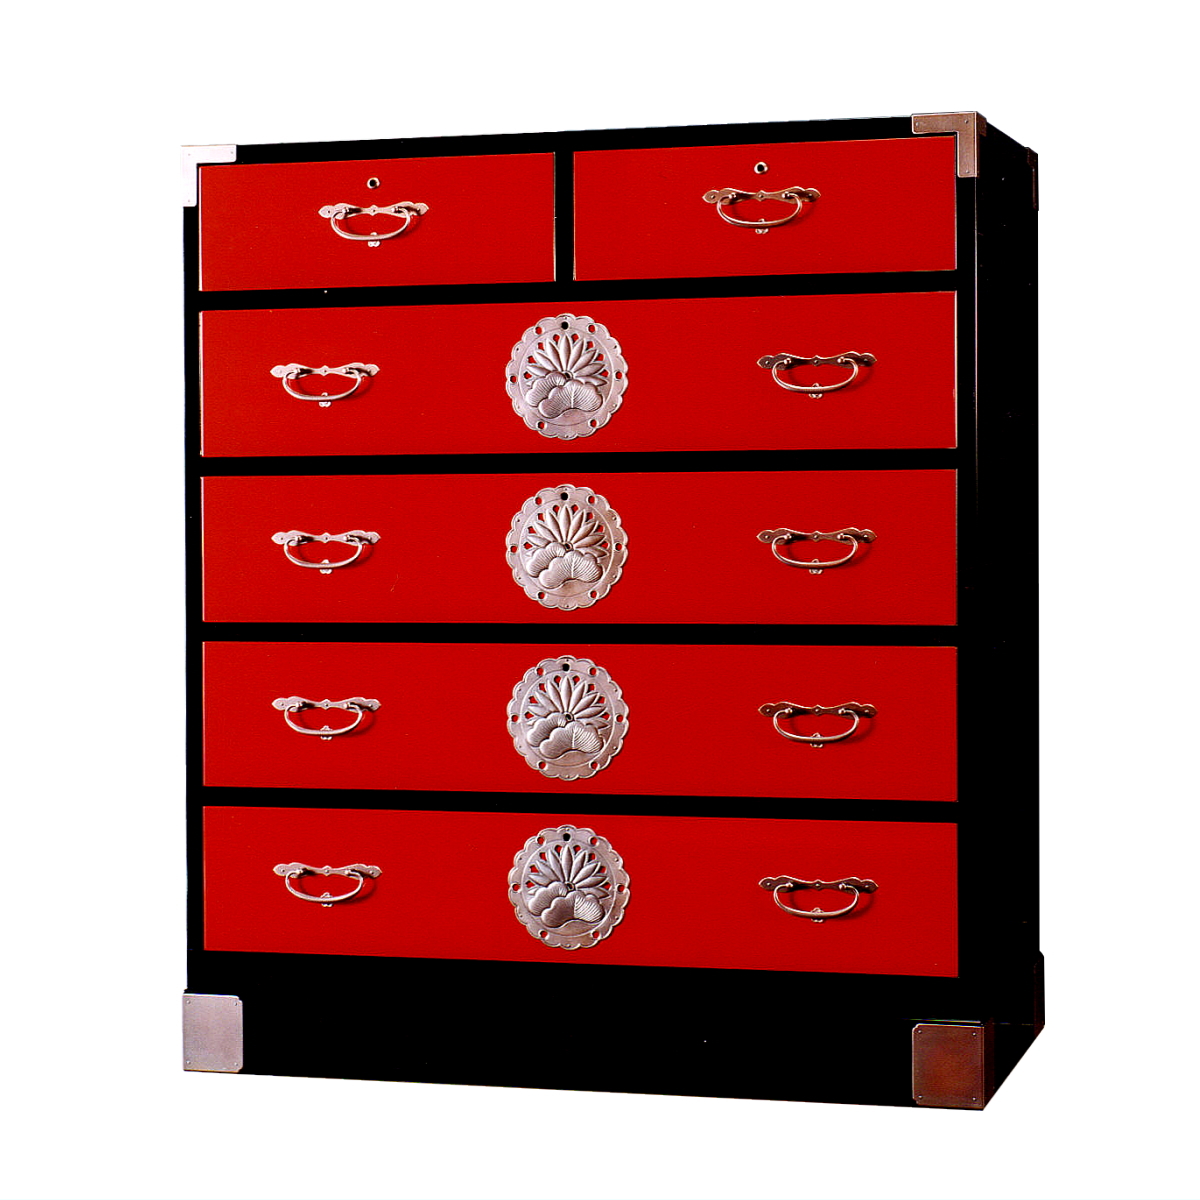 Nihonmatsu Traditional Furniture - 30 Fork Art Chest of Drawers 4-2 Vermilion and Black